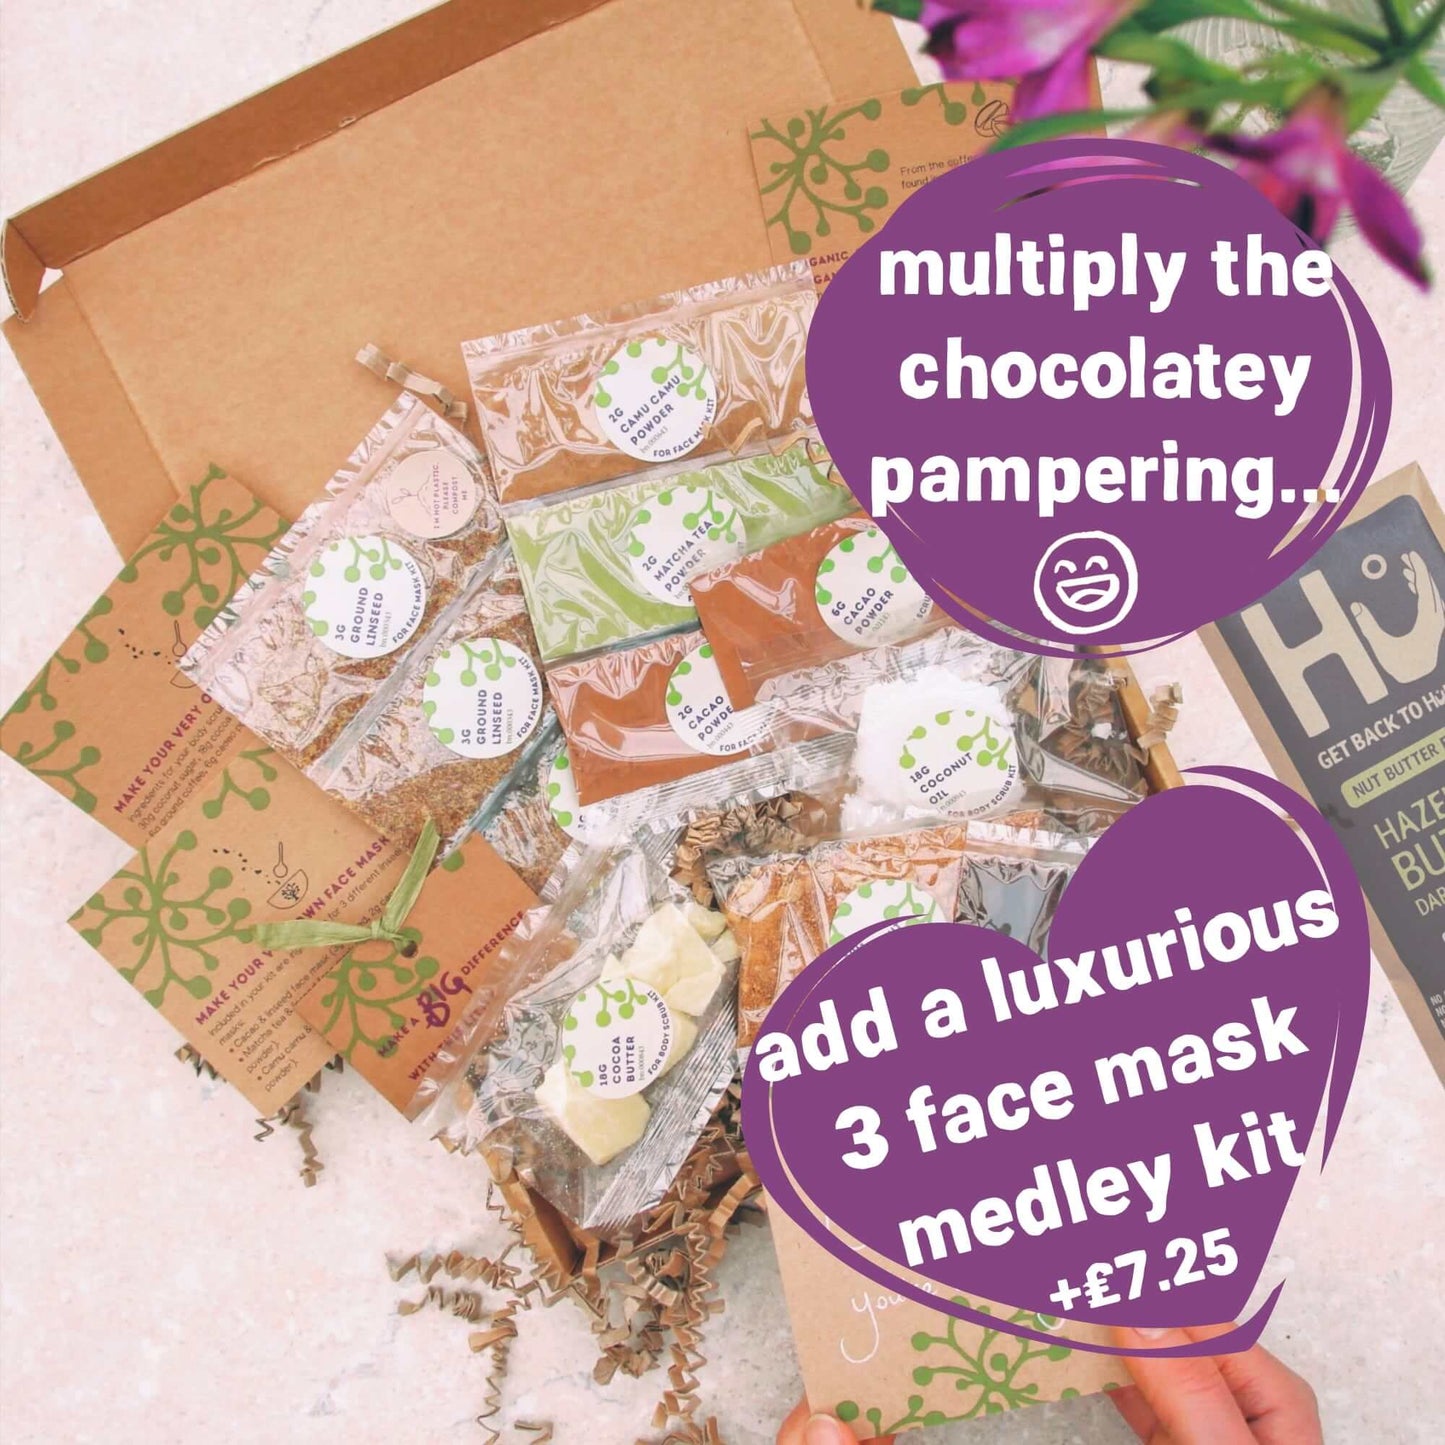 3 organic vegan face mask kits to add to love you letterbox gift